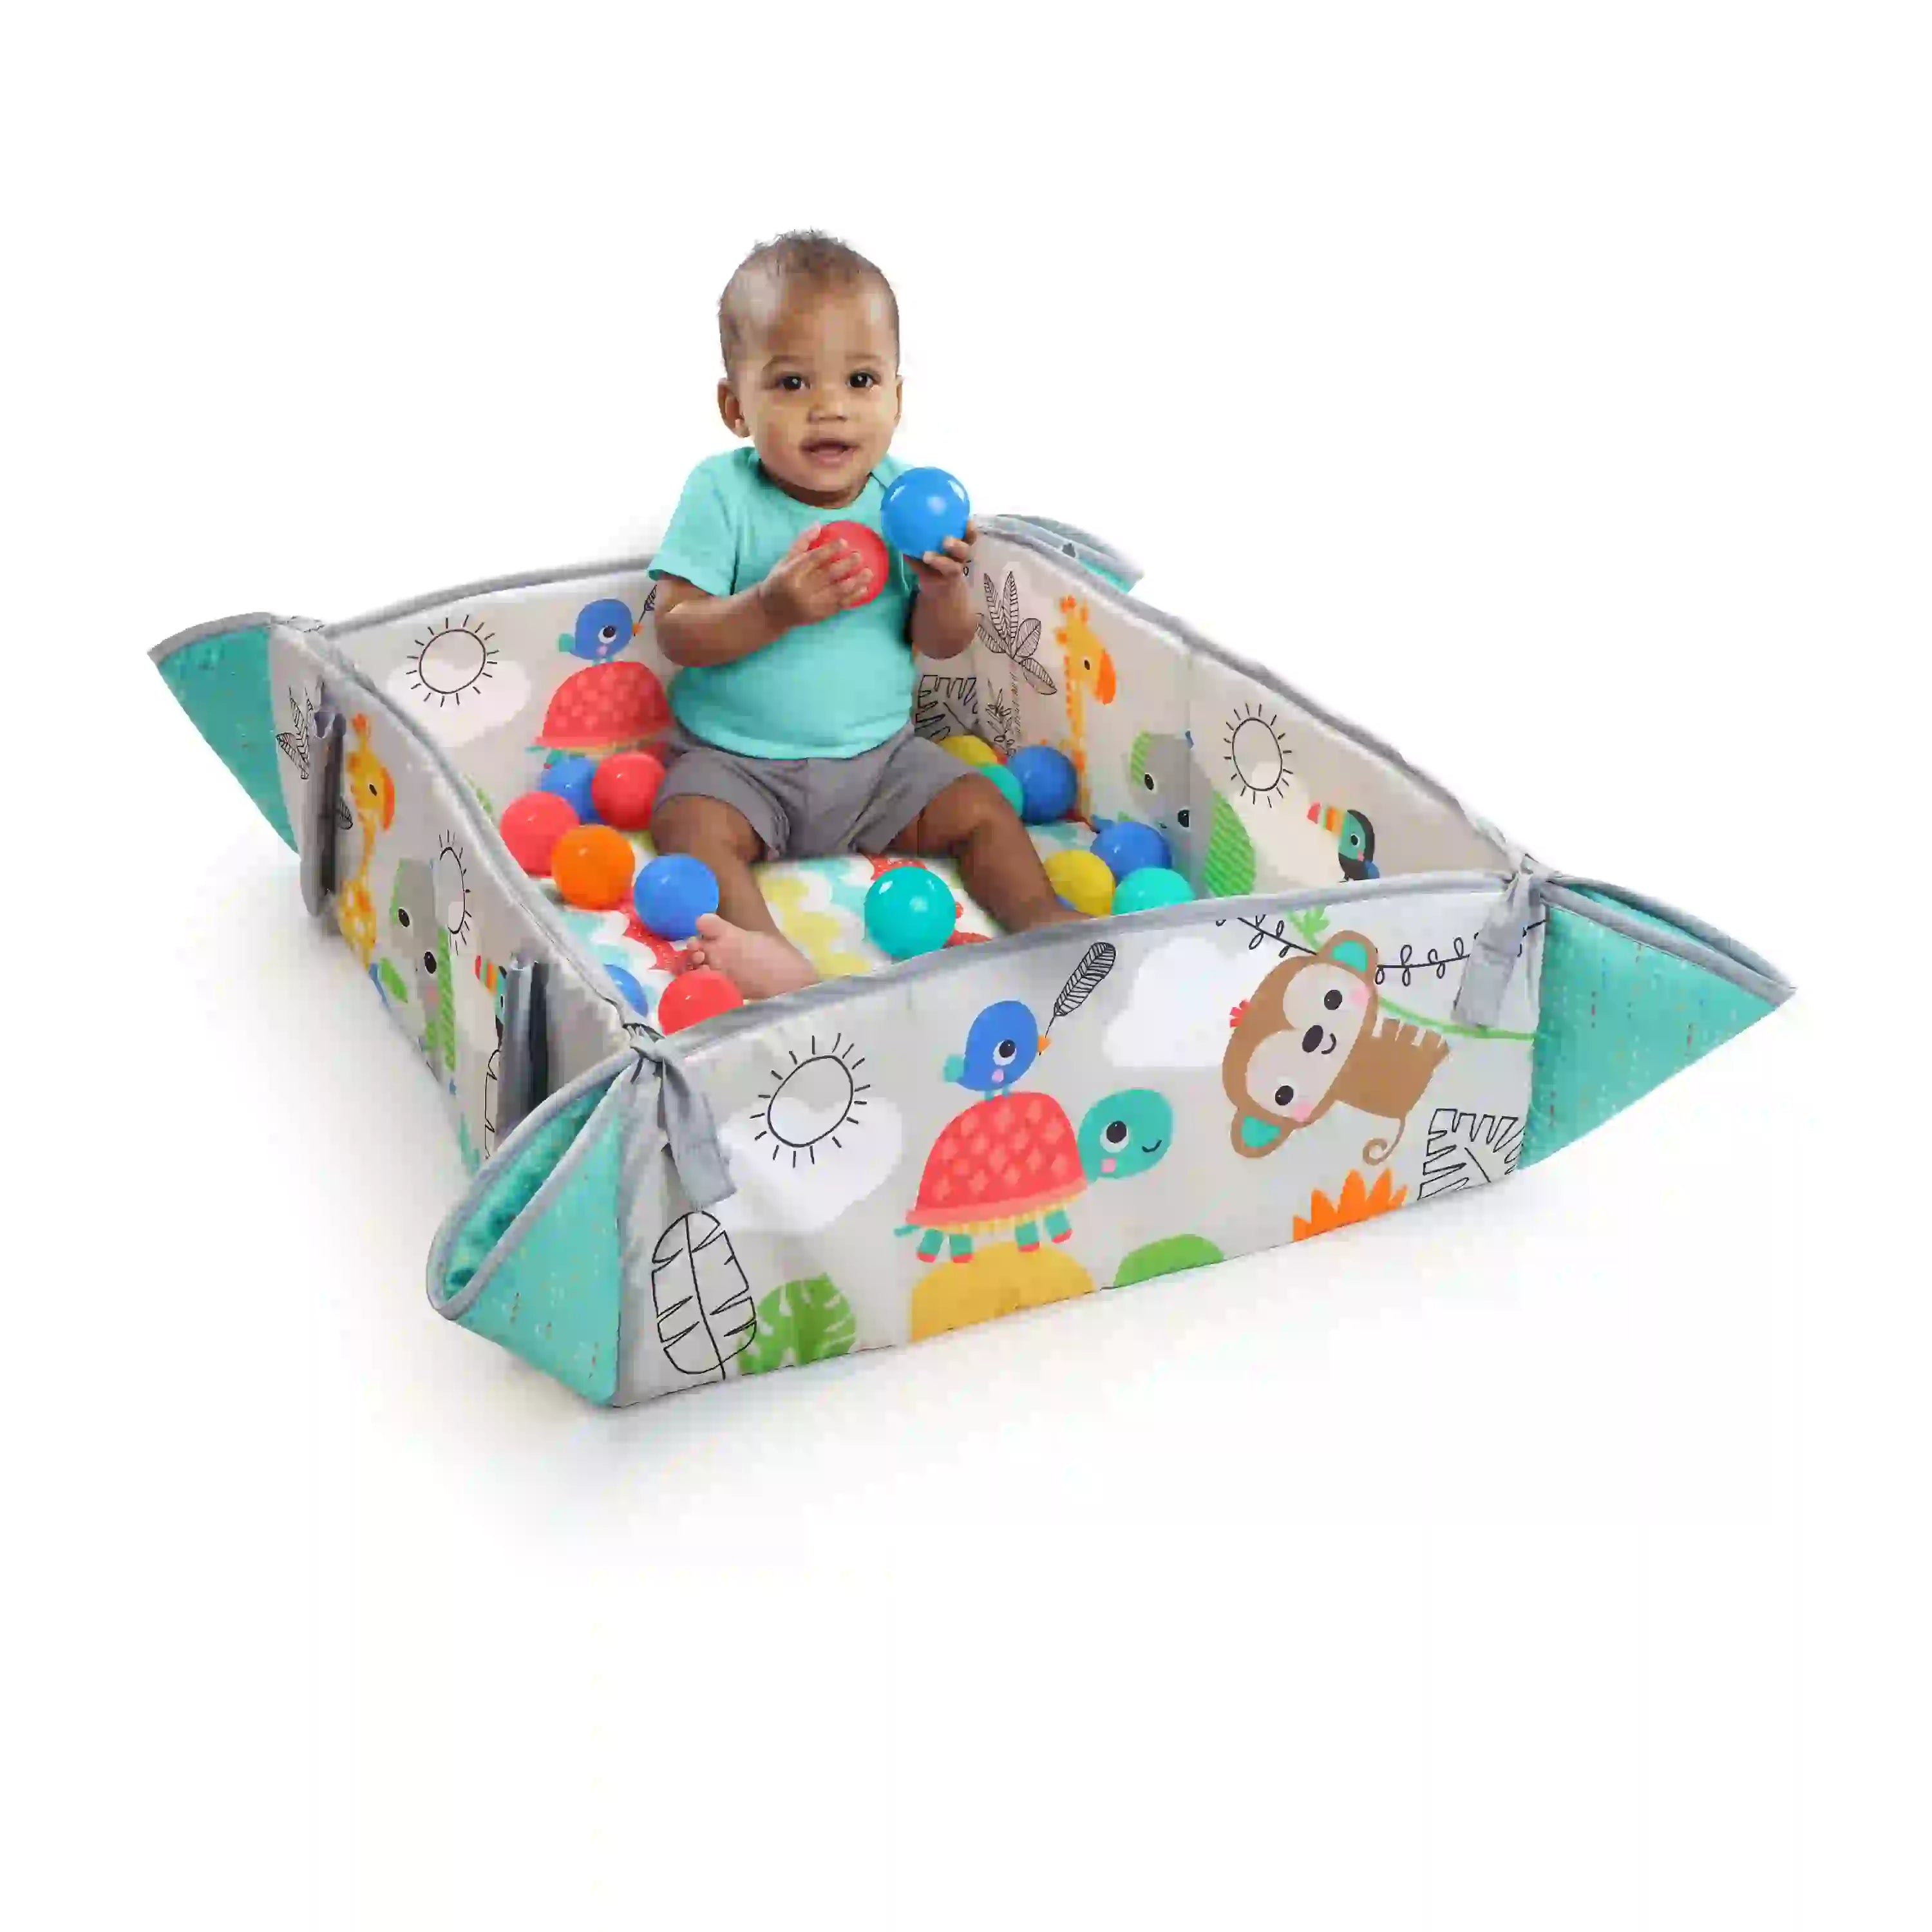 5-In-1 Your Way Ball Play Activity Gym & Ball Pit - Tropical